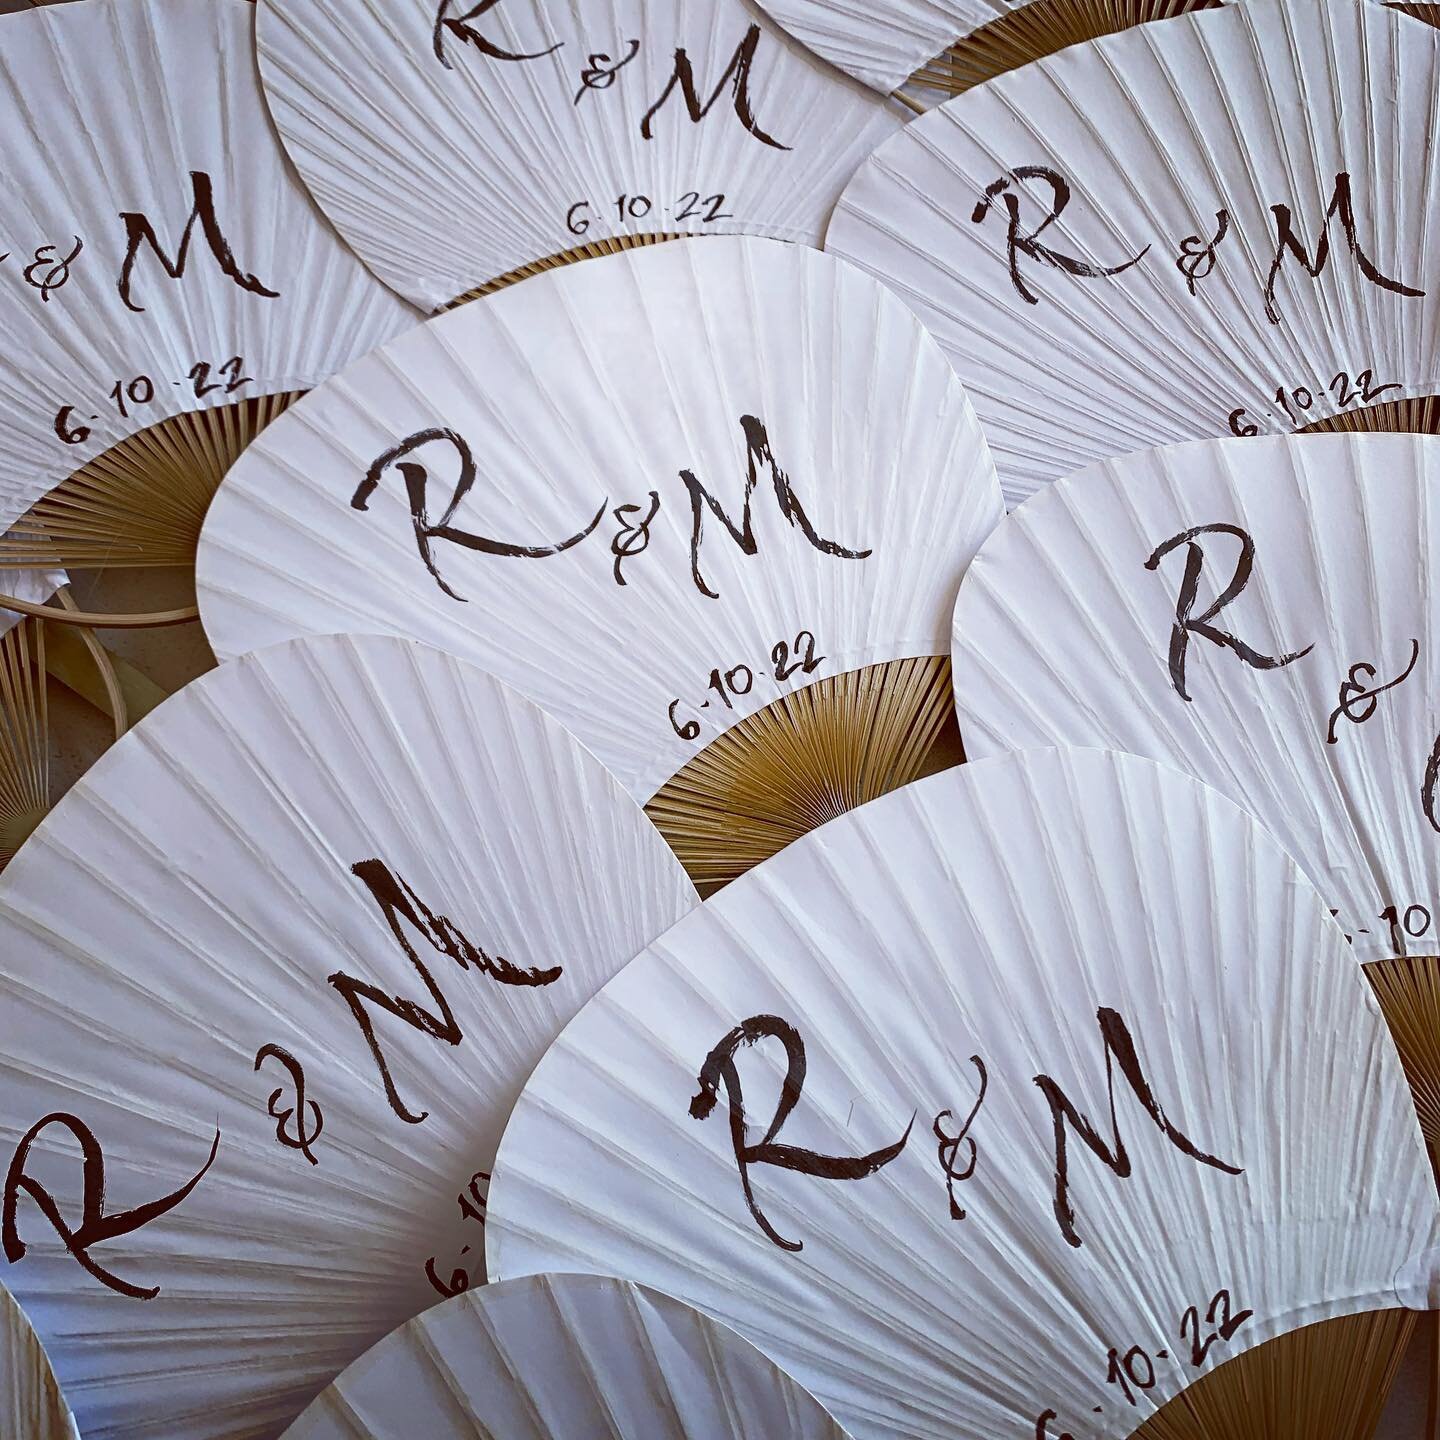 fandamonium. a handsome couple of capitals for a lovely couple's summer destination wedding party. ⁣
⁣
⁣
⁣
⁣
⁣
#handlettering #paperfans #handfans #capitalletters #moderncalligraphy #destinationwedding #destinationweddingfavors #partyfavors #weddingf